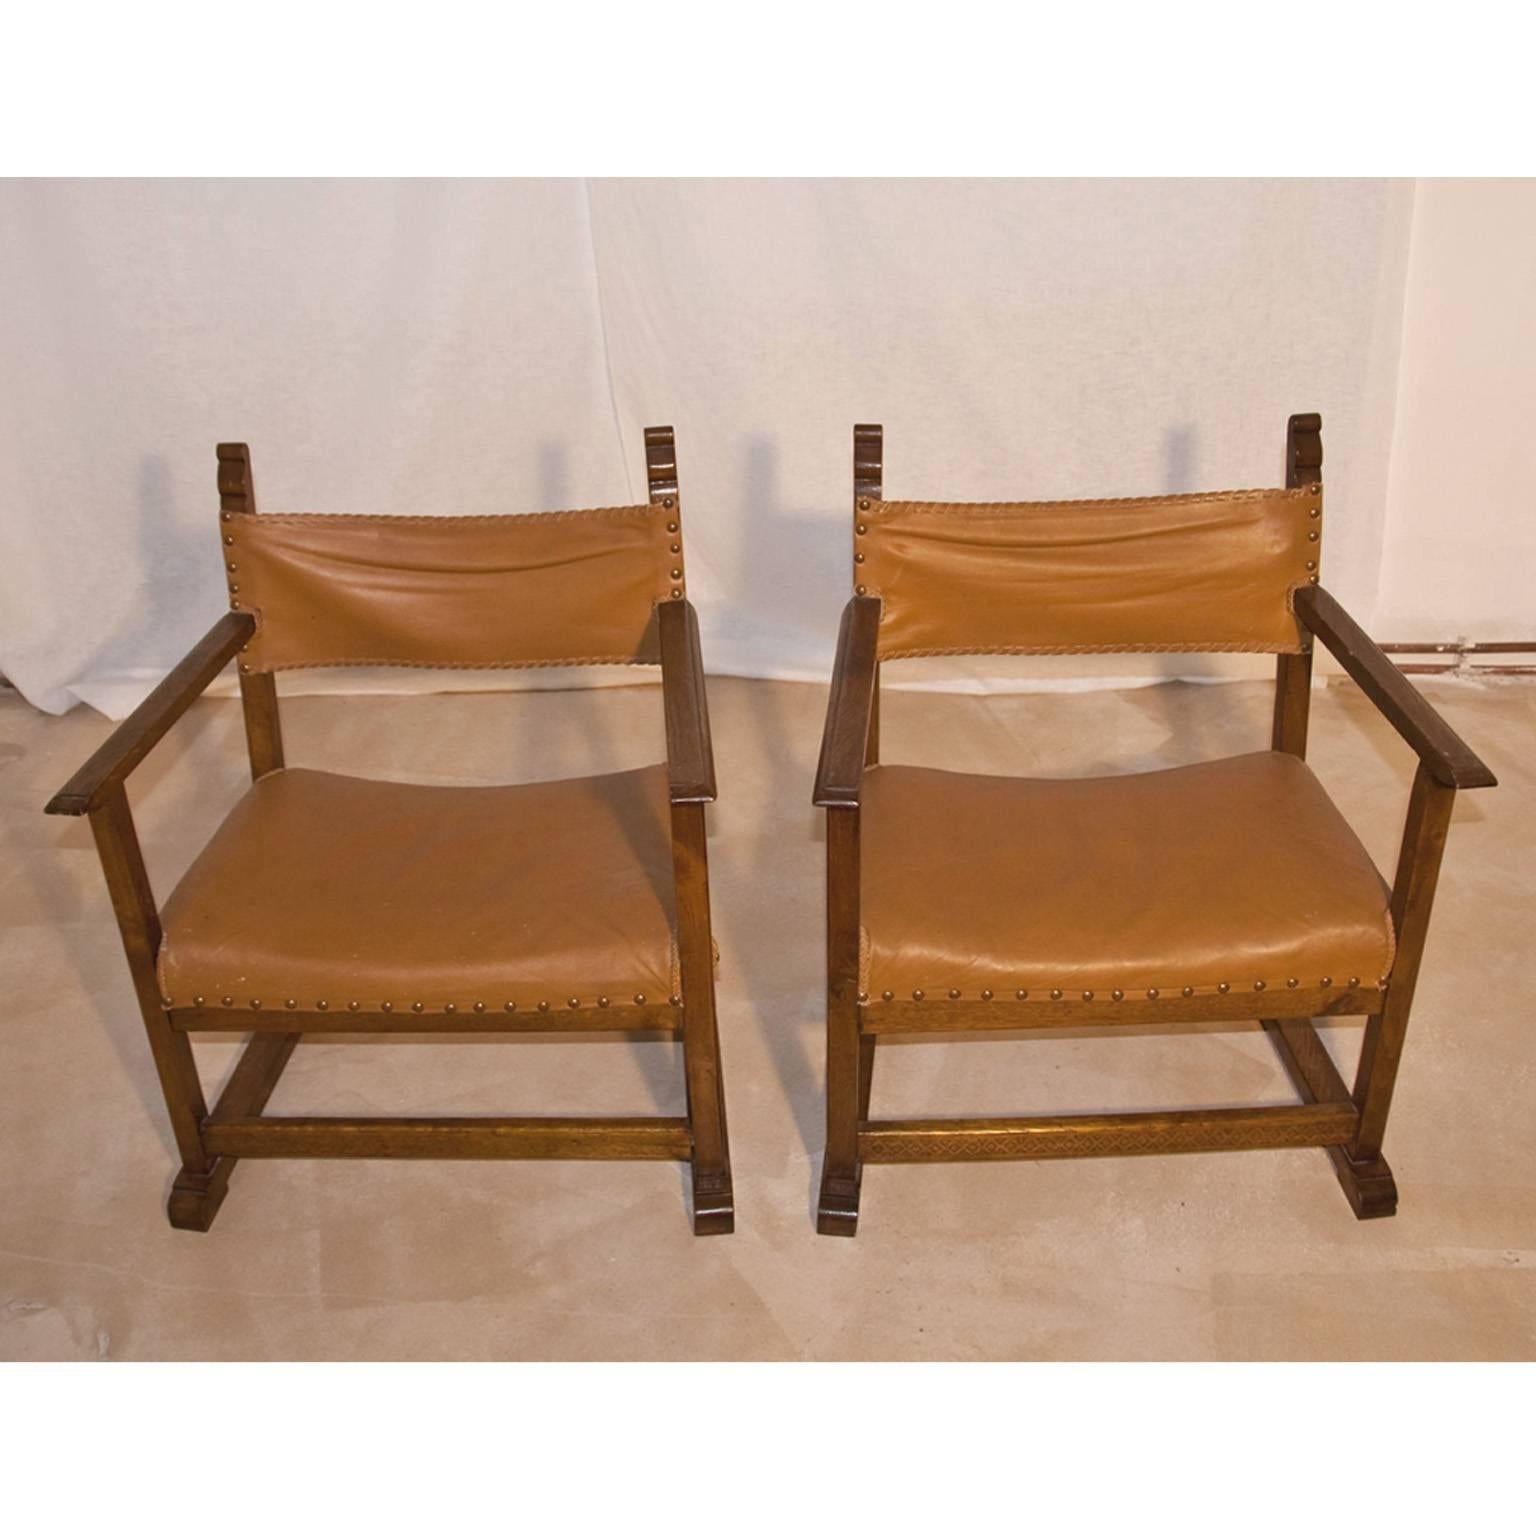 Adolf Loos pair of fireside chairs presended at the Werkbundsieglung Vienna, House Nr. 49. The same style chair of chair was previously used by Adolf Lo-os for the apartment Hugo Semler in Pilsen.